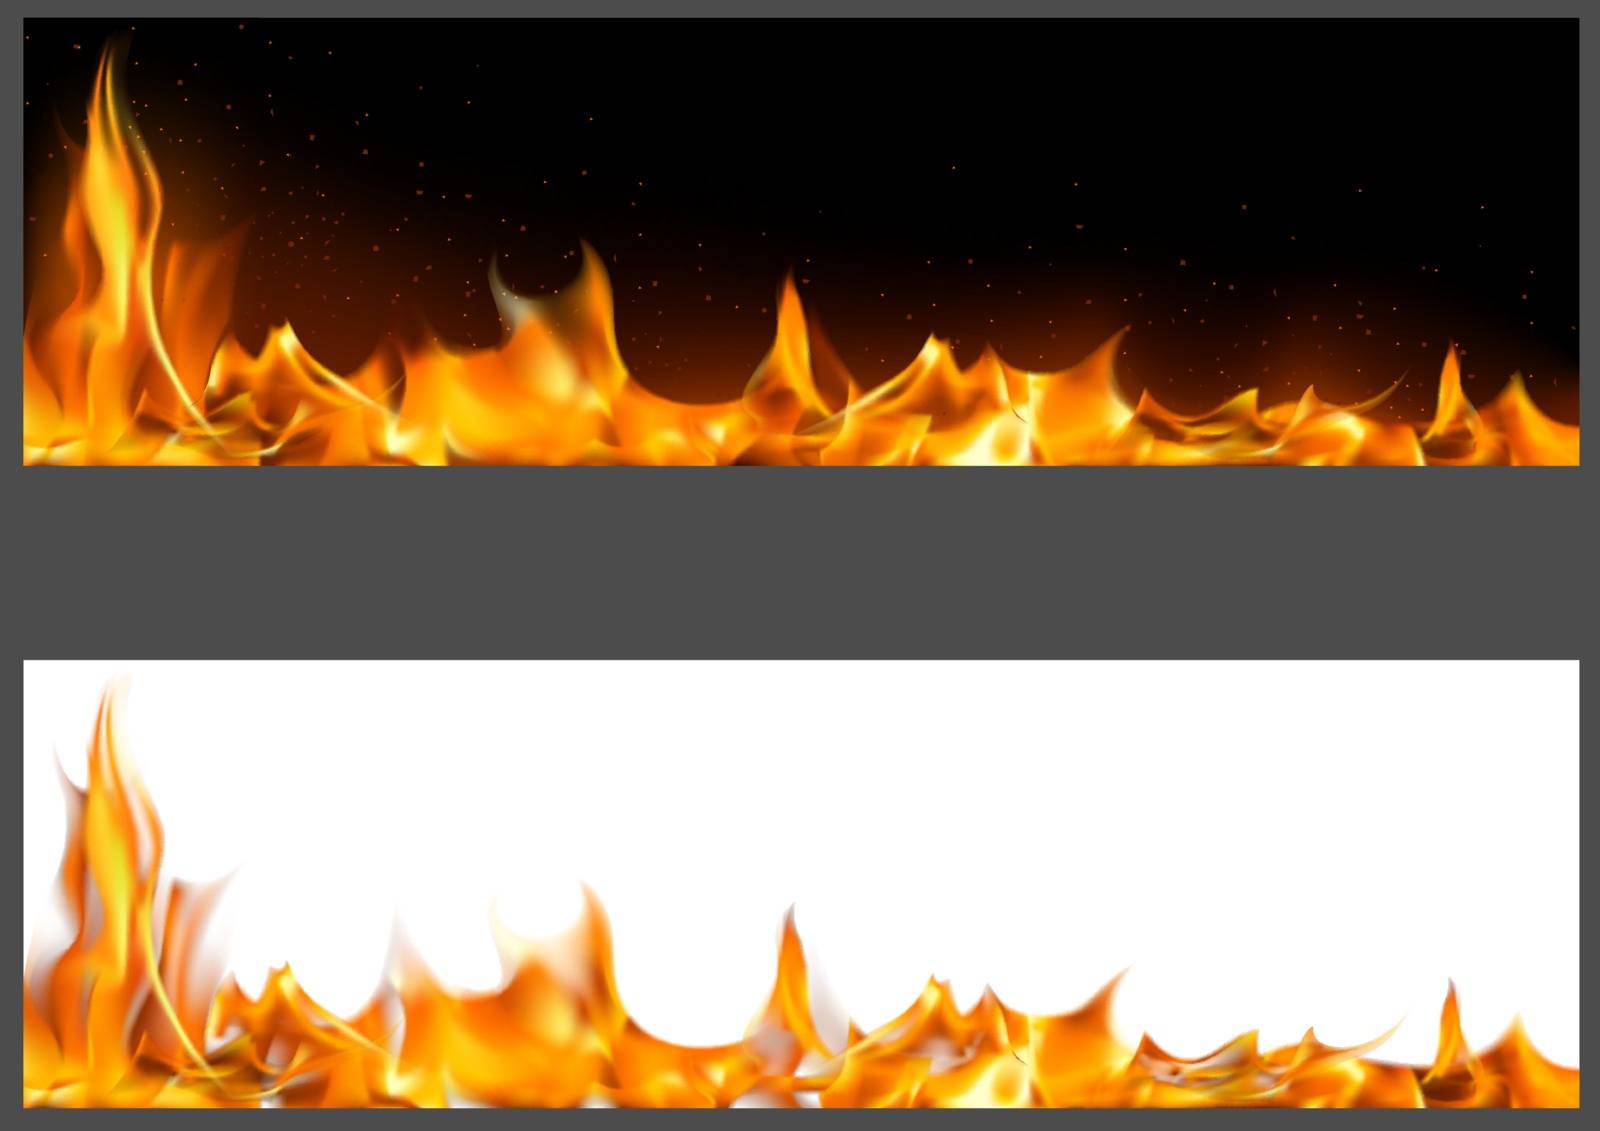 Realistic Fire Flames Banners by illustratorCZ